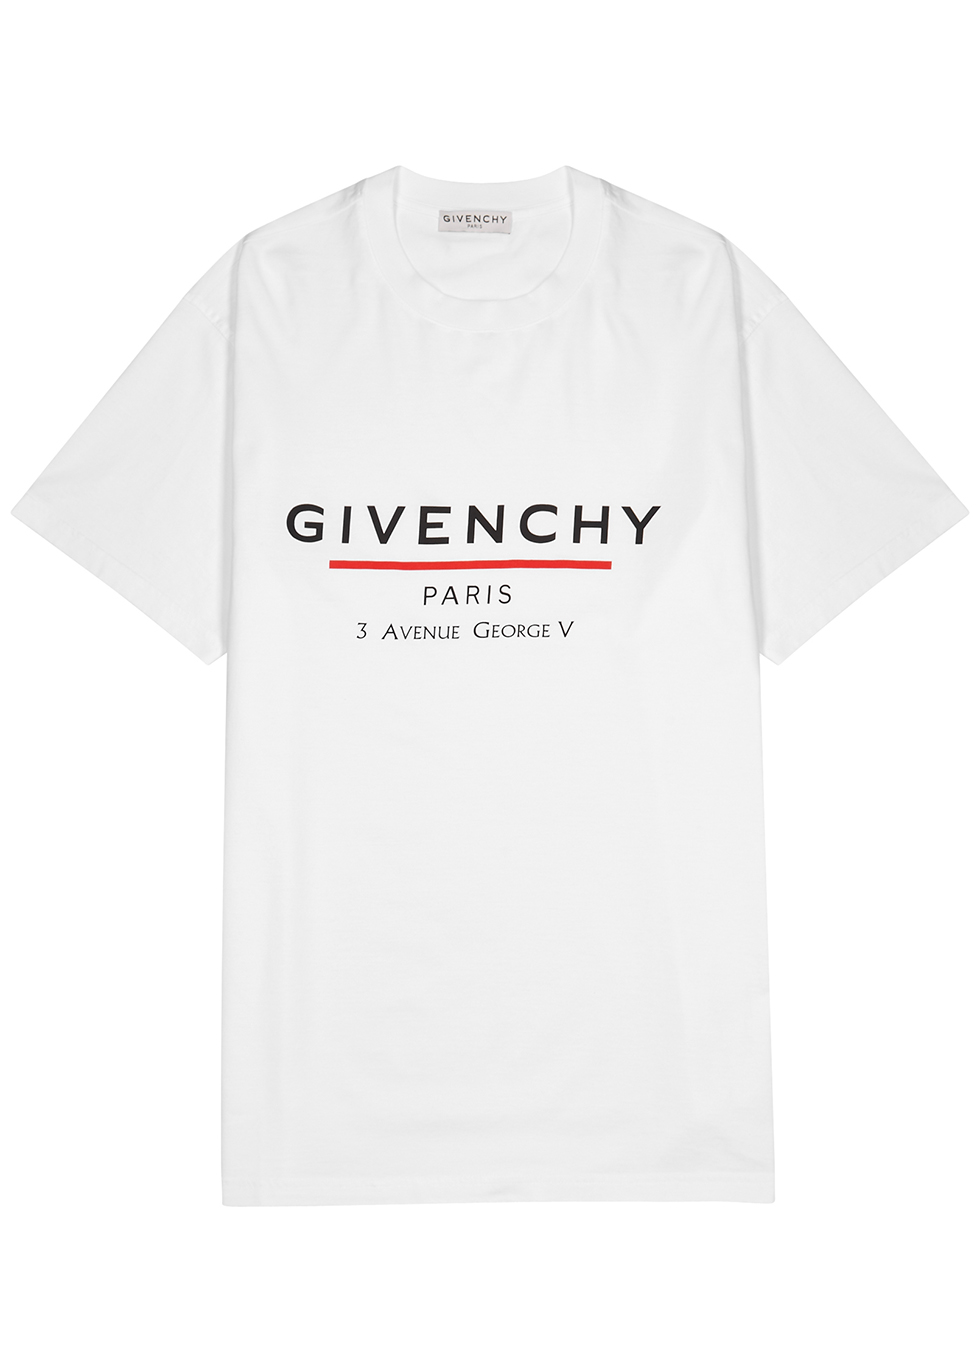 navy givenchy t shirt,Save up to 17%,www.ilcascinone.com